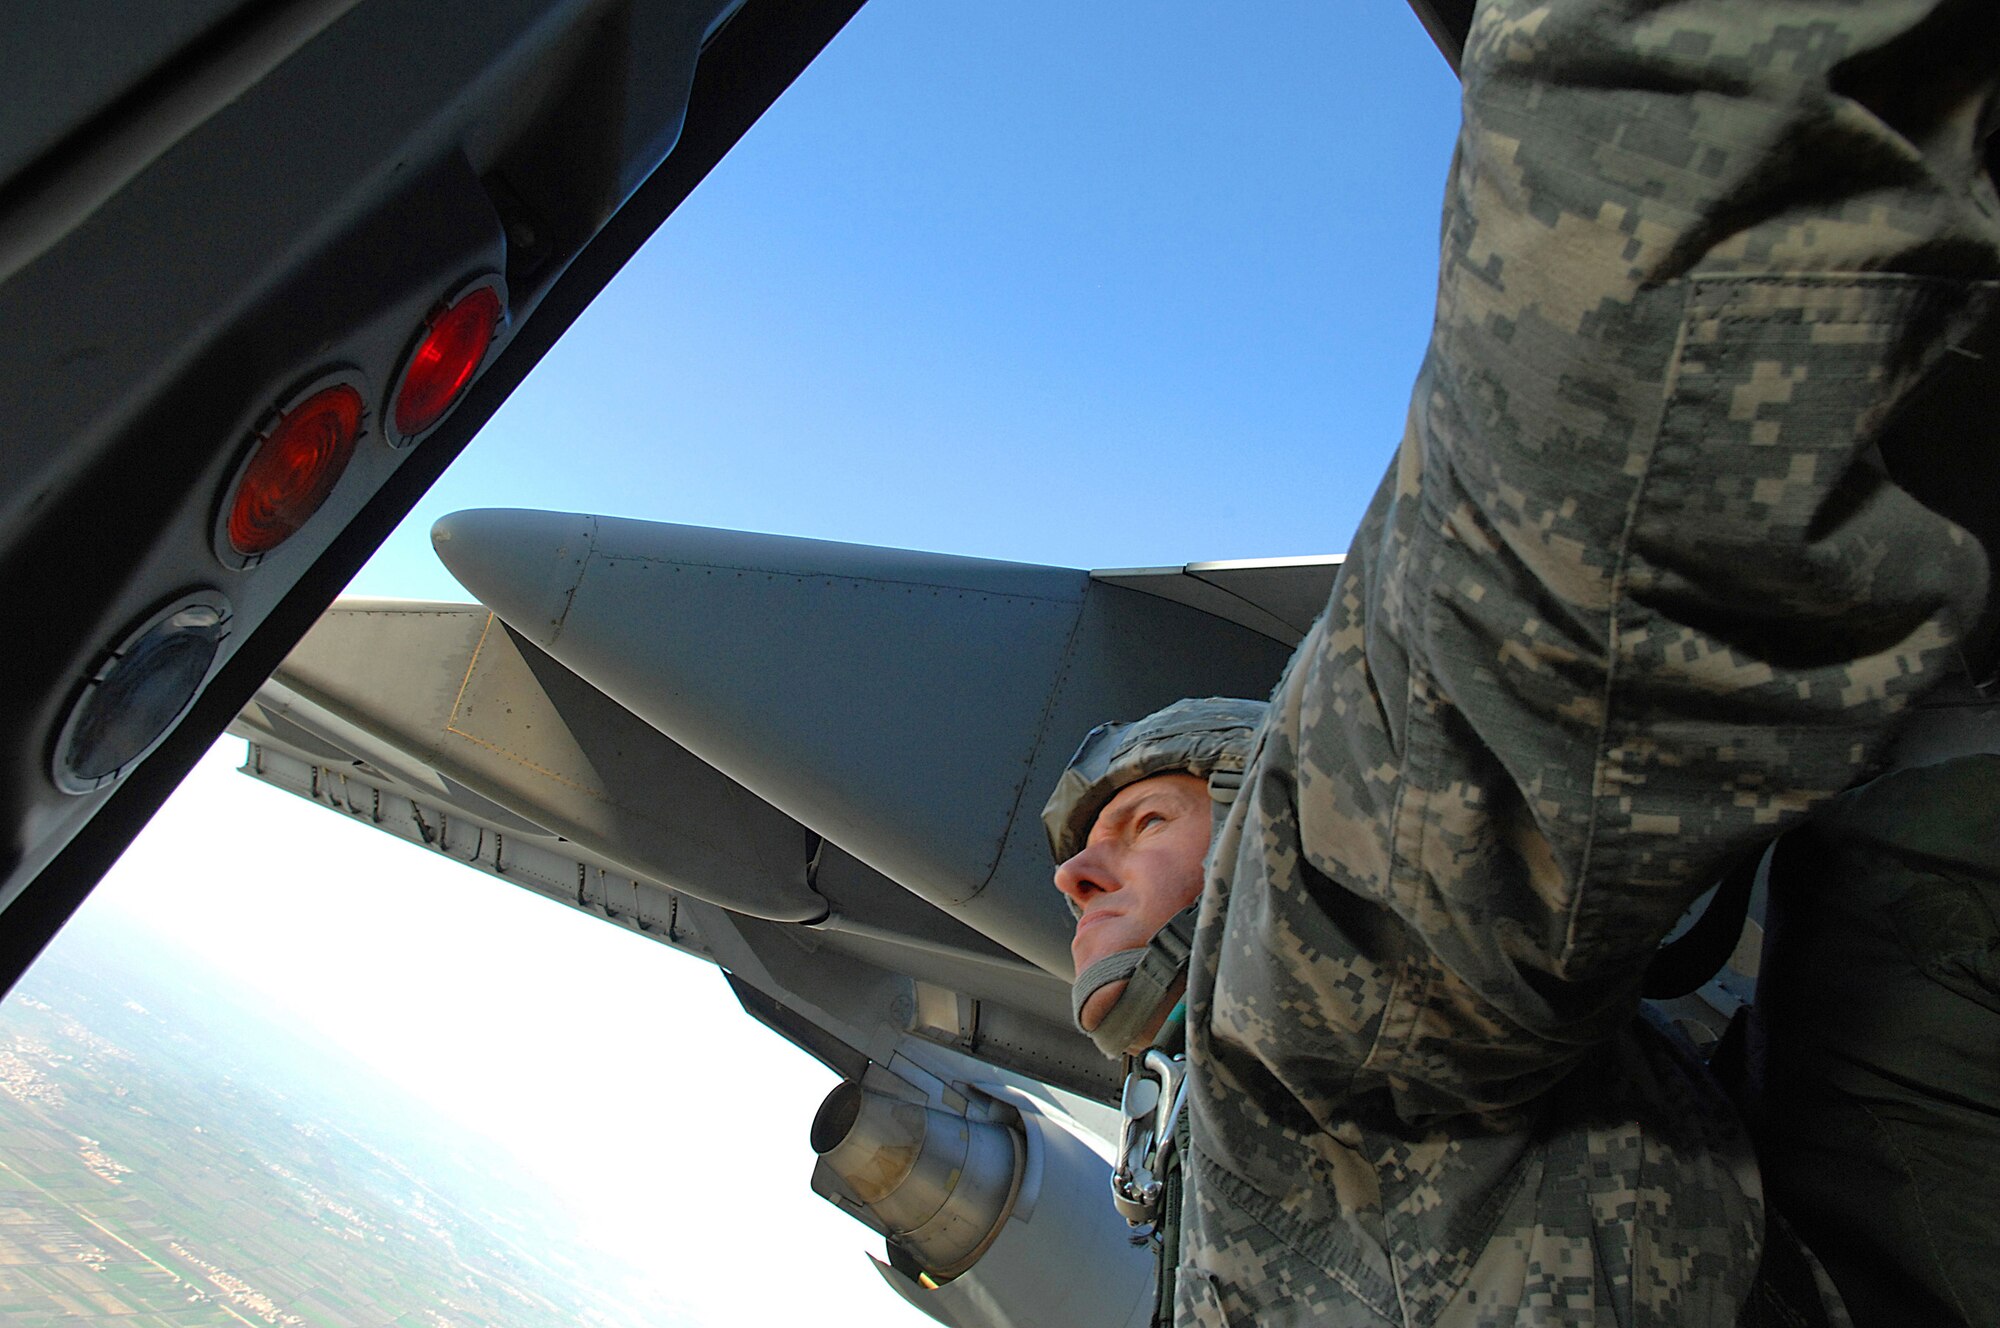 A U.S. Army paratrooper from the 20th Engineering Brigade, 101st Airborne Division, Fort Campbell, Ky., prepares to parachute from a Charleston AFB C-17 into Cairo, Egypt, Nov. 7 as part of Exercise Bright Star 2007. (U.S Air Force photo/Staff Sgt. Aaron Allmon)